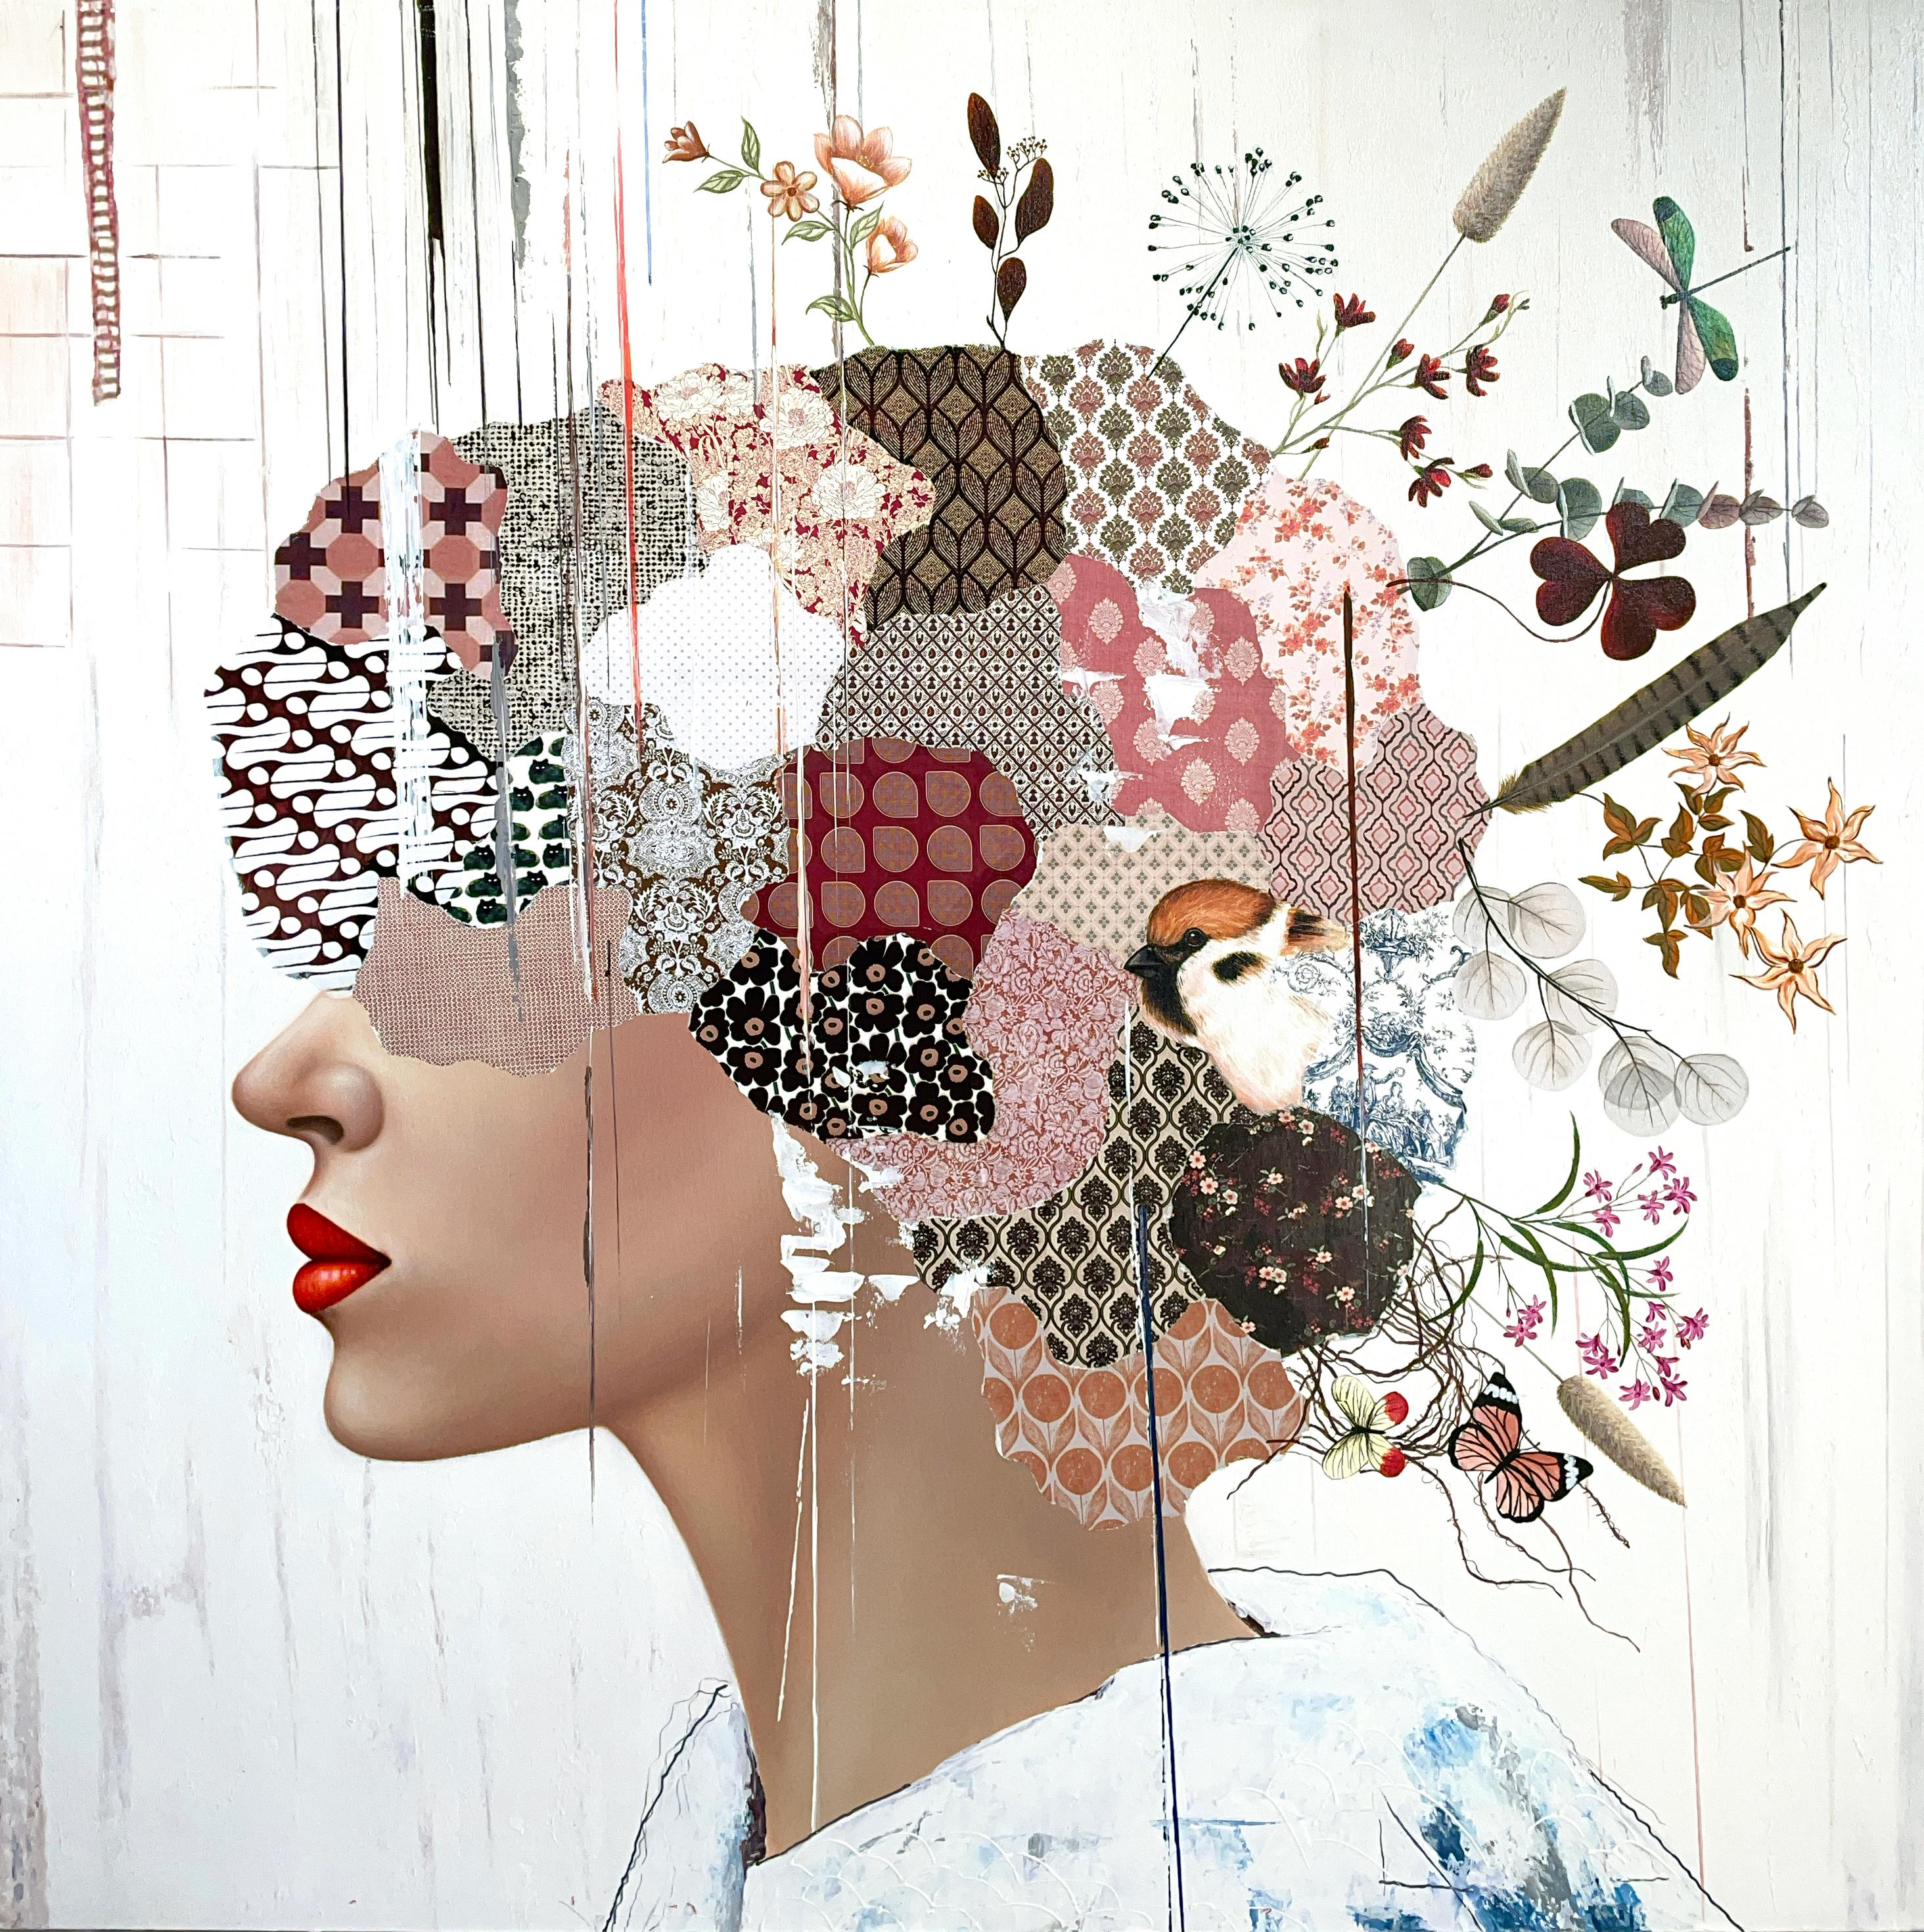  "Growing" mysterious mixed media portrait of a female with floral collage - Mixed Media Art by Irene Hoff